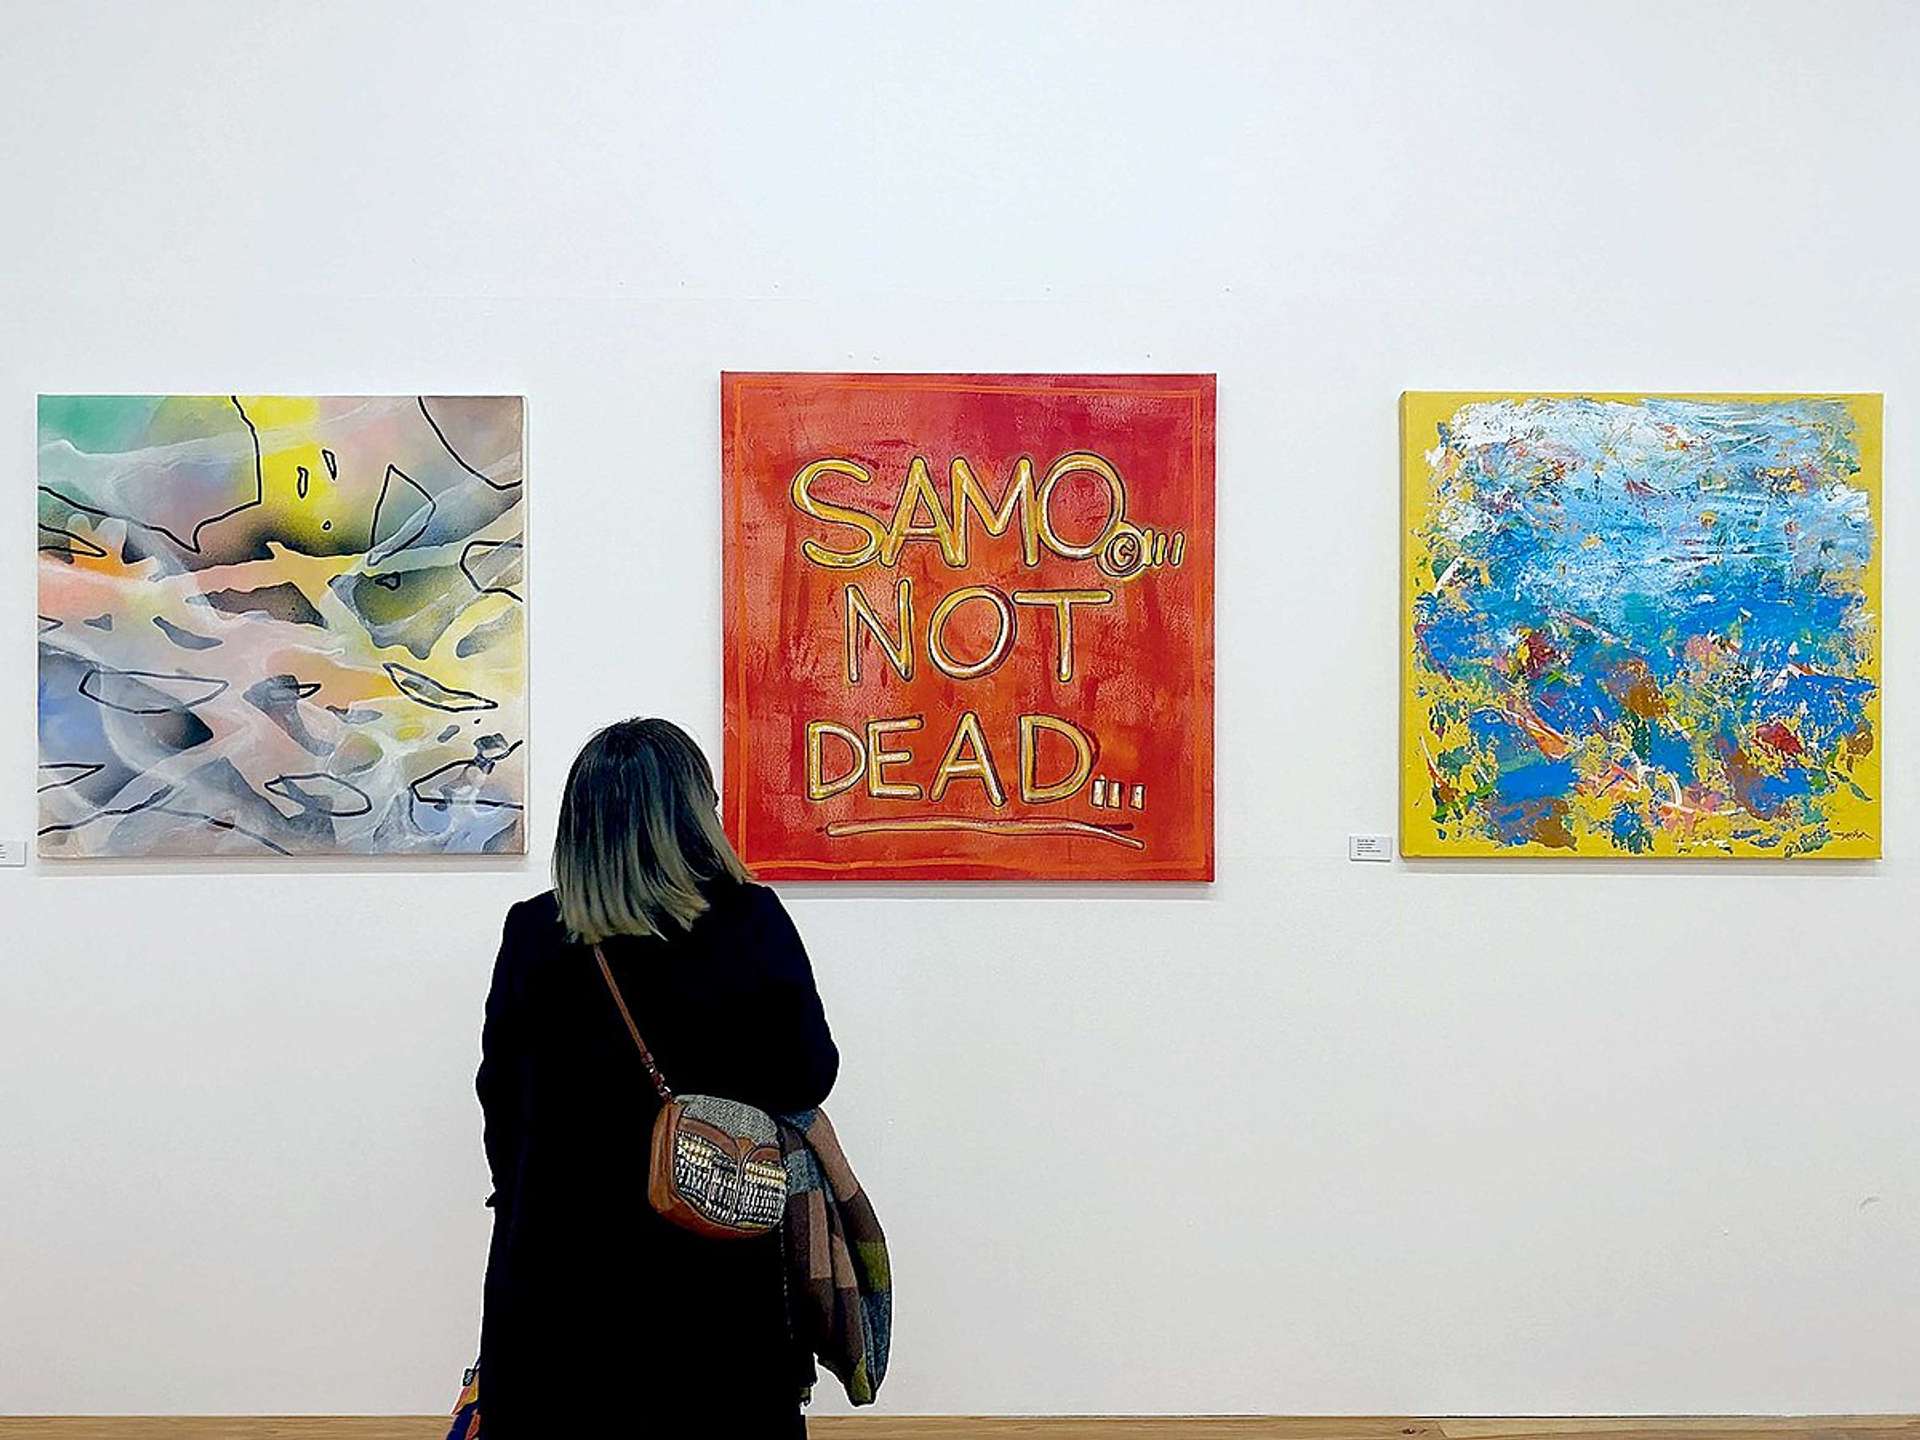 Samo Is Not Dead canvas by Al Diaz. The work is pictured in the centre of a row of three hung canvases, with a woman stood in the foreground, looking at the art.